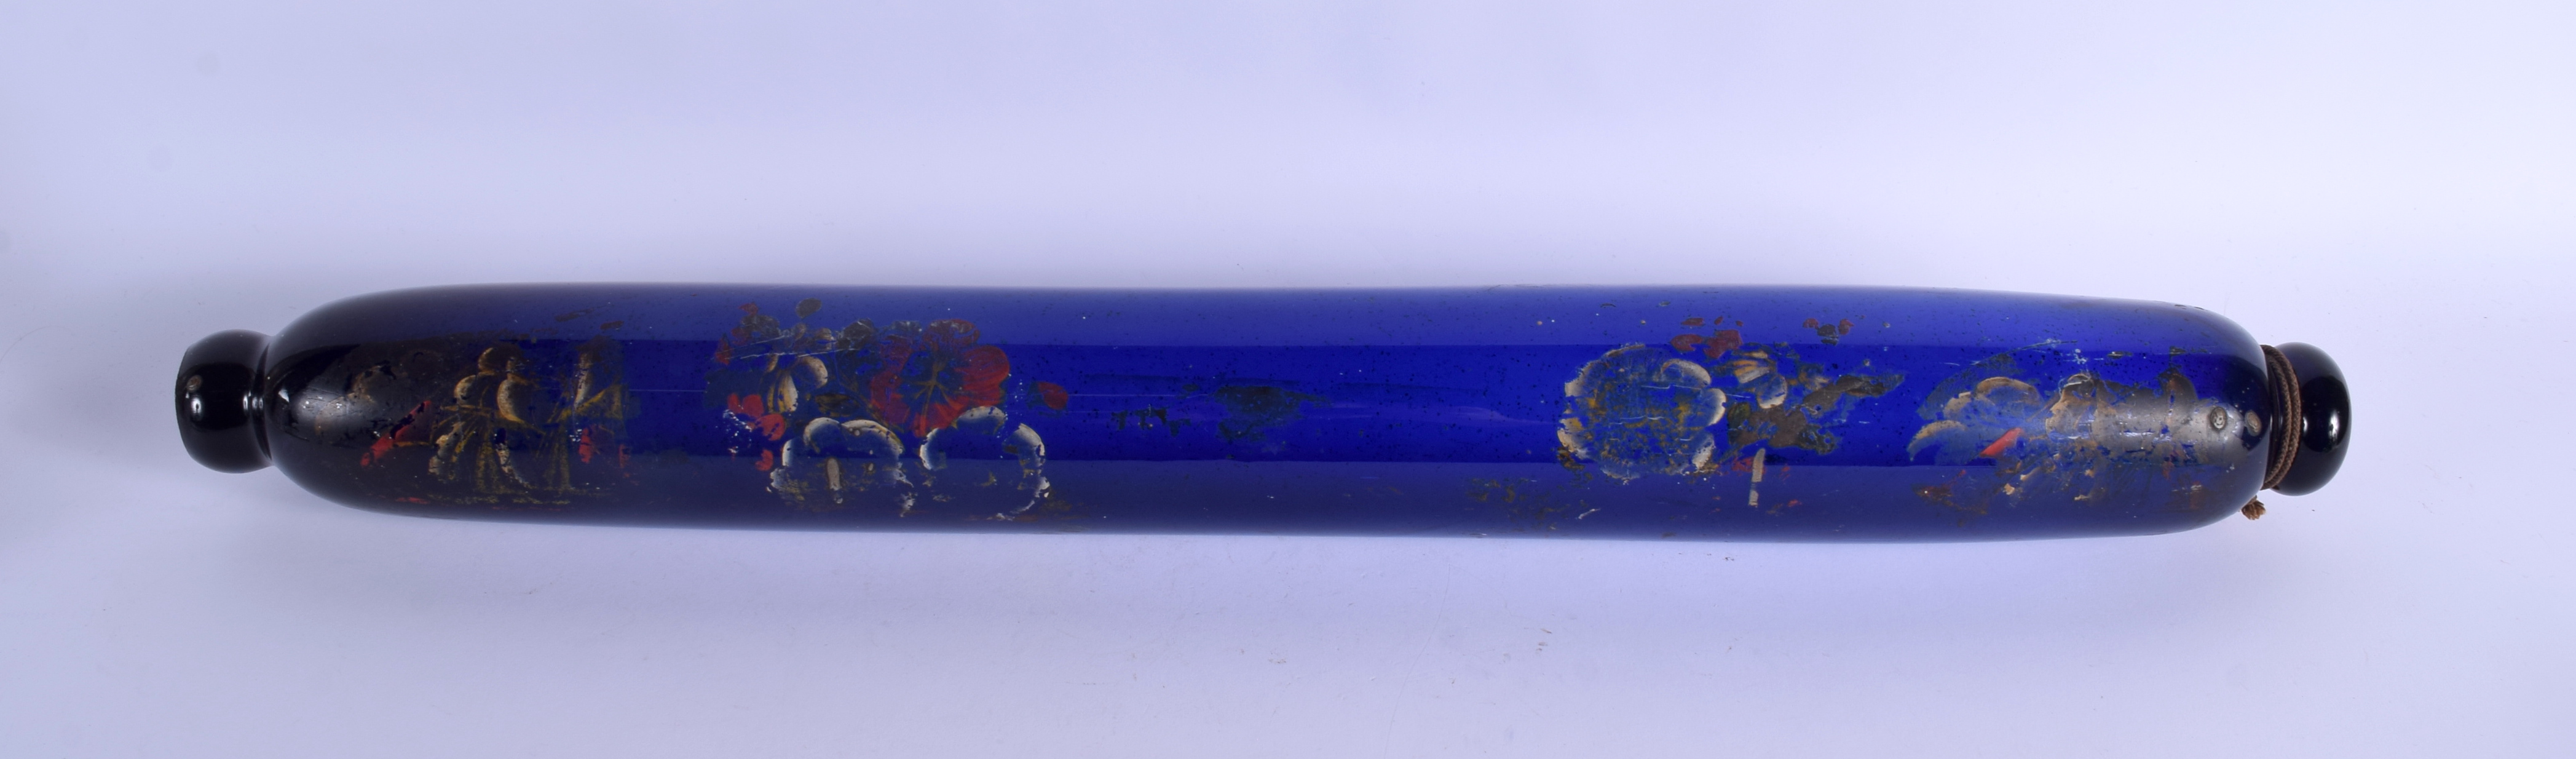 A LONG ANTIQUE BRISTOL BLUE ROLLING PIN painted with flowers. 68 cm long.